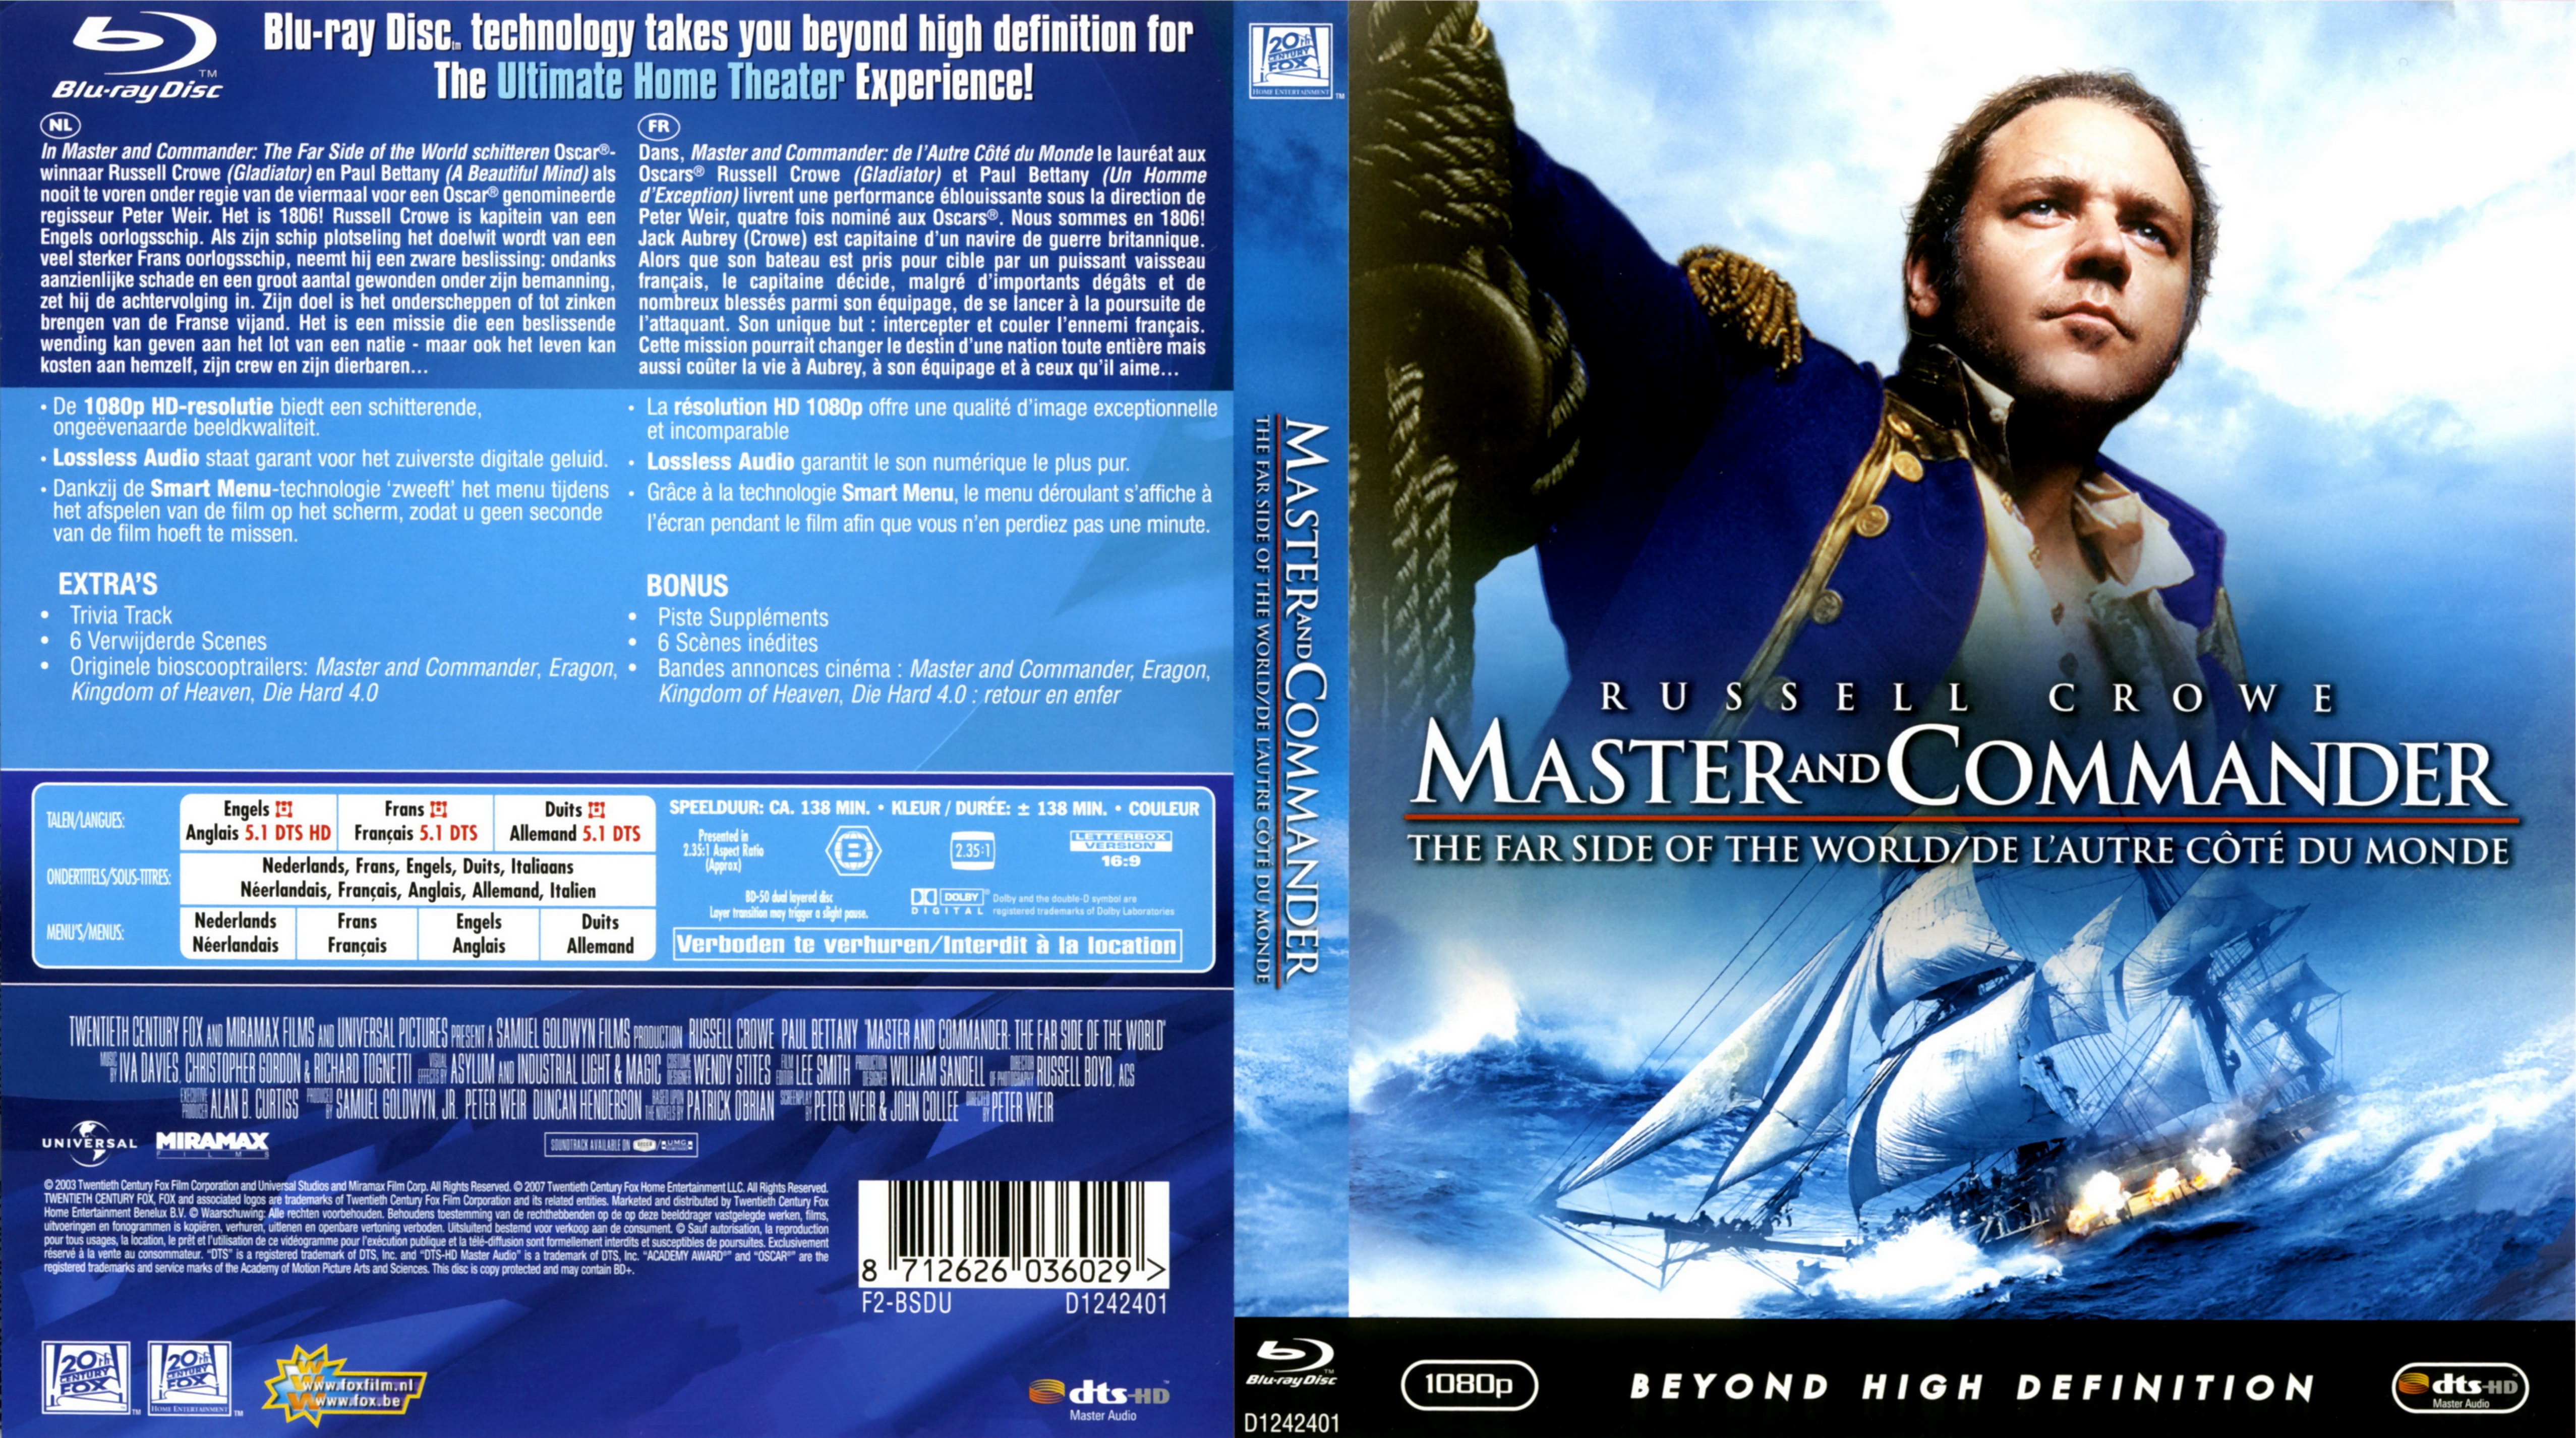 Jaquette DVD Master and Commander (BLU-RAY) v2